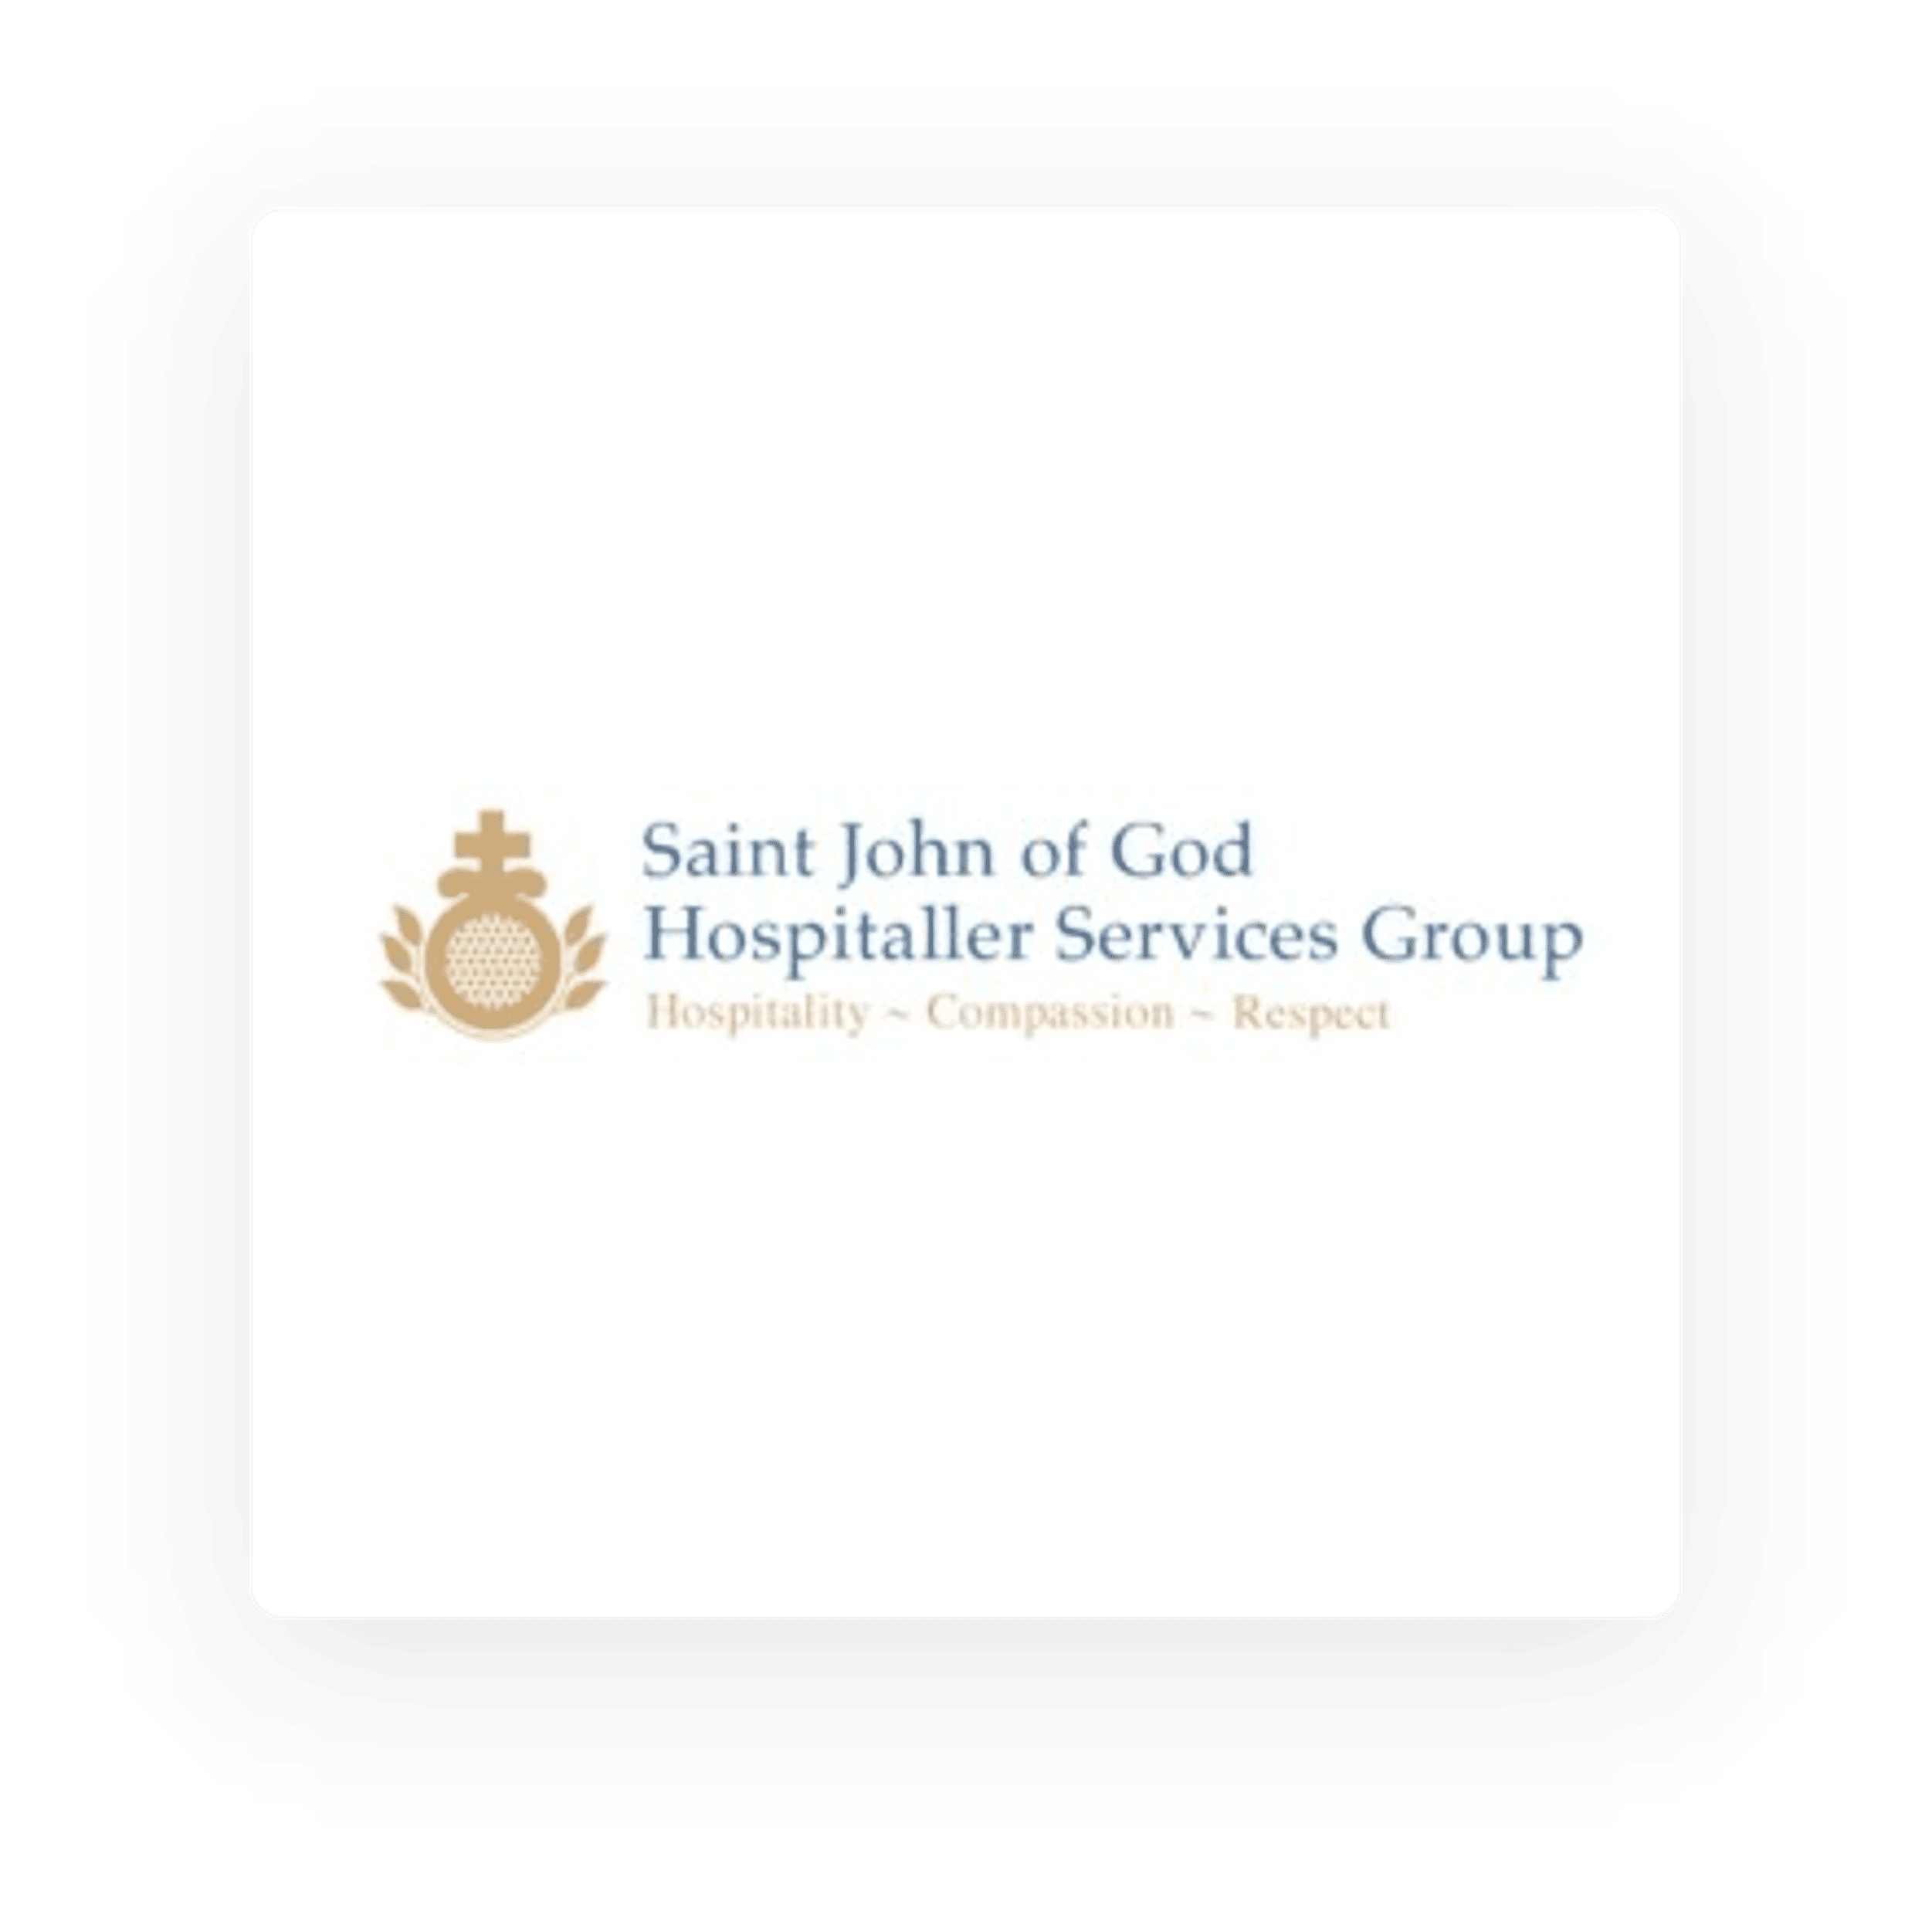 Logo of saint john of god hospitaller services group featuring a cross and the values 